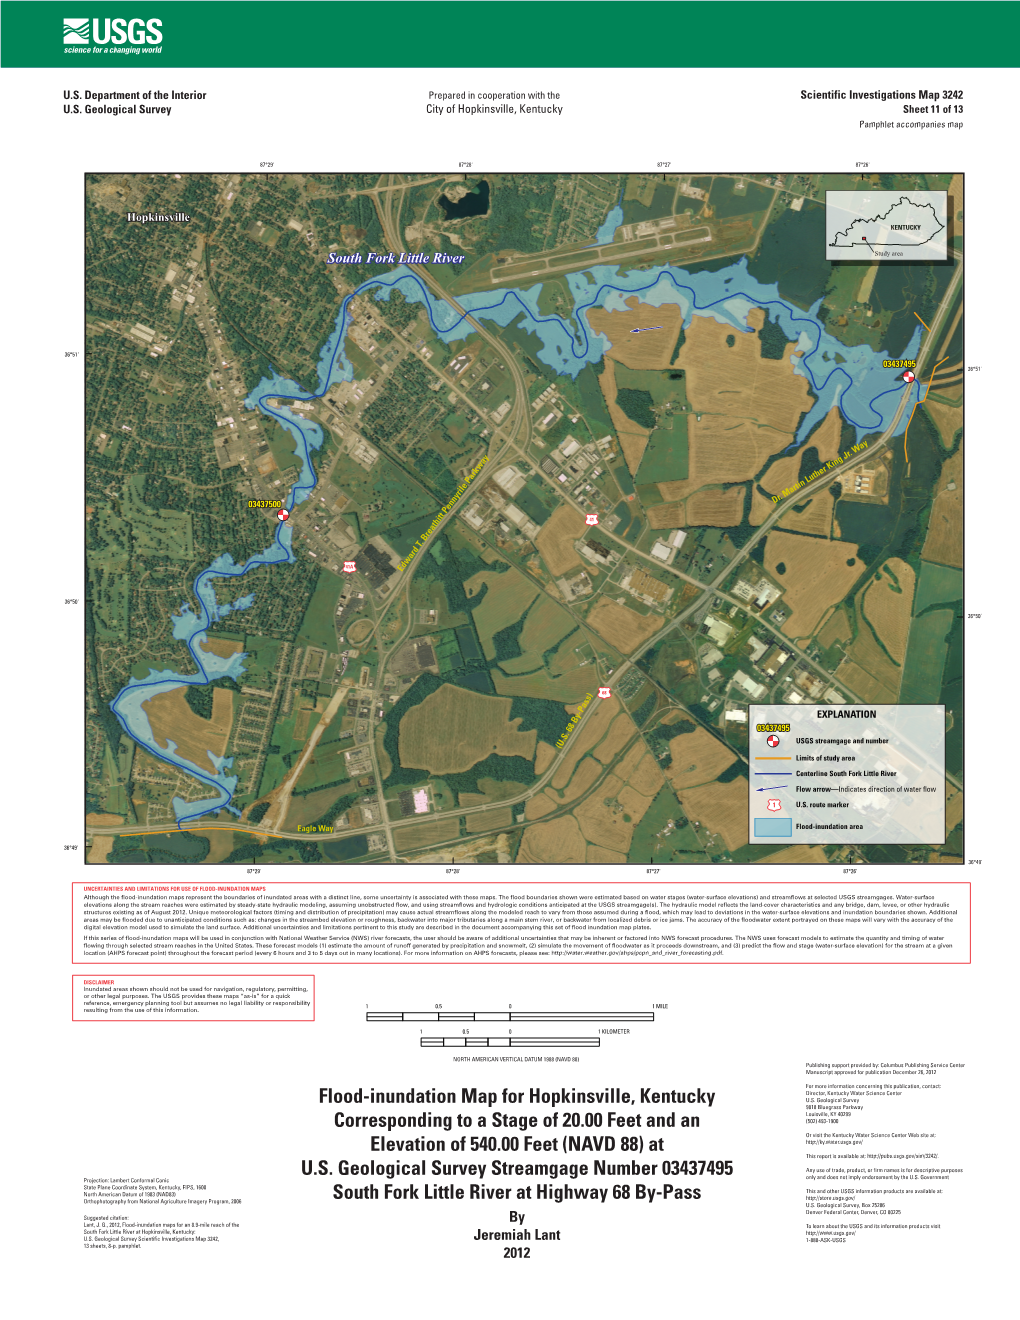 Flood-Inundation Map for Hopkinsville, Kentucky Corresponding to A